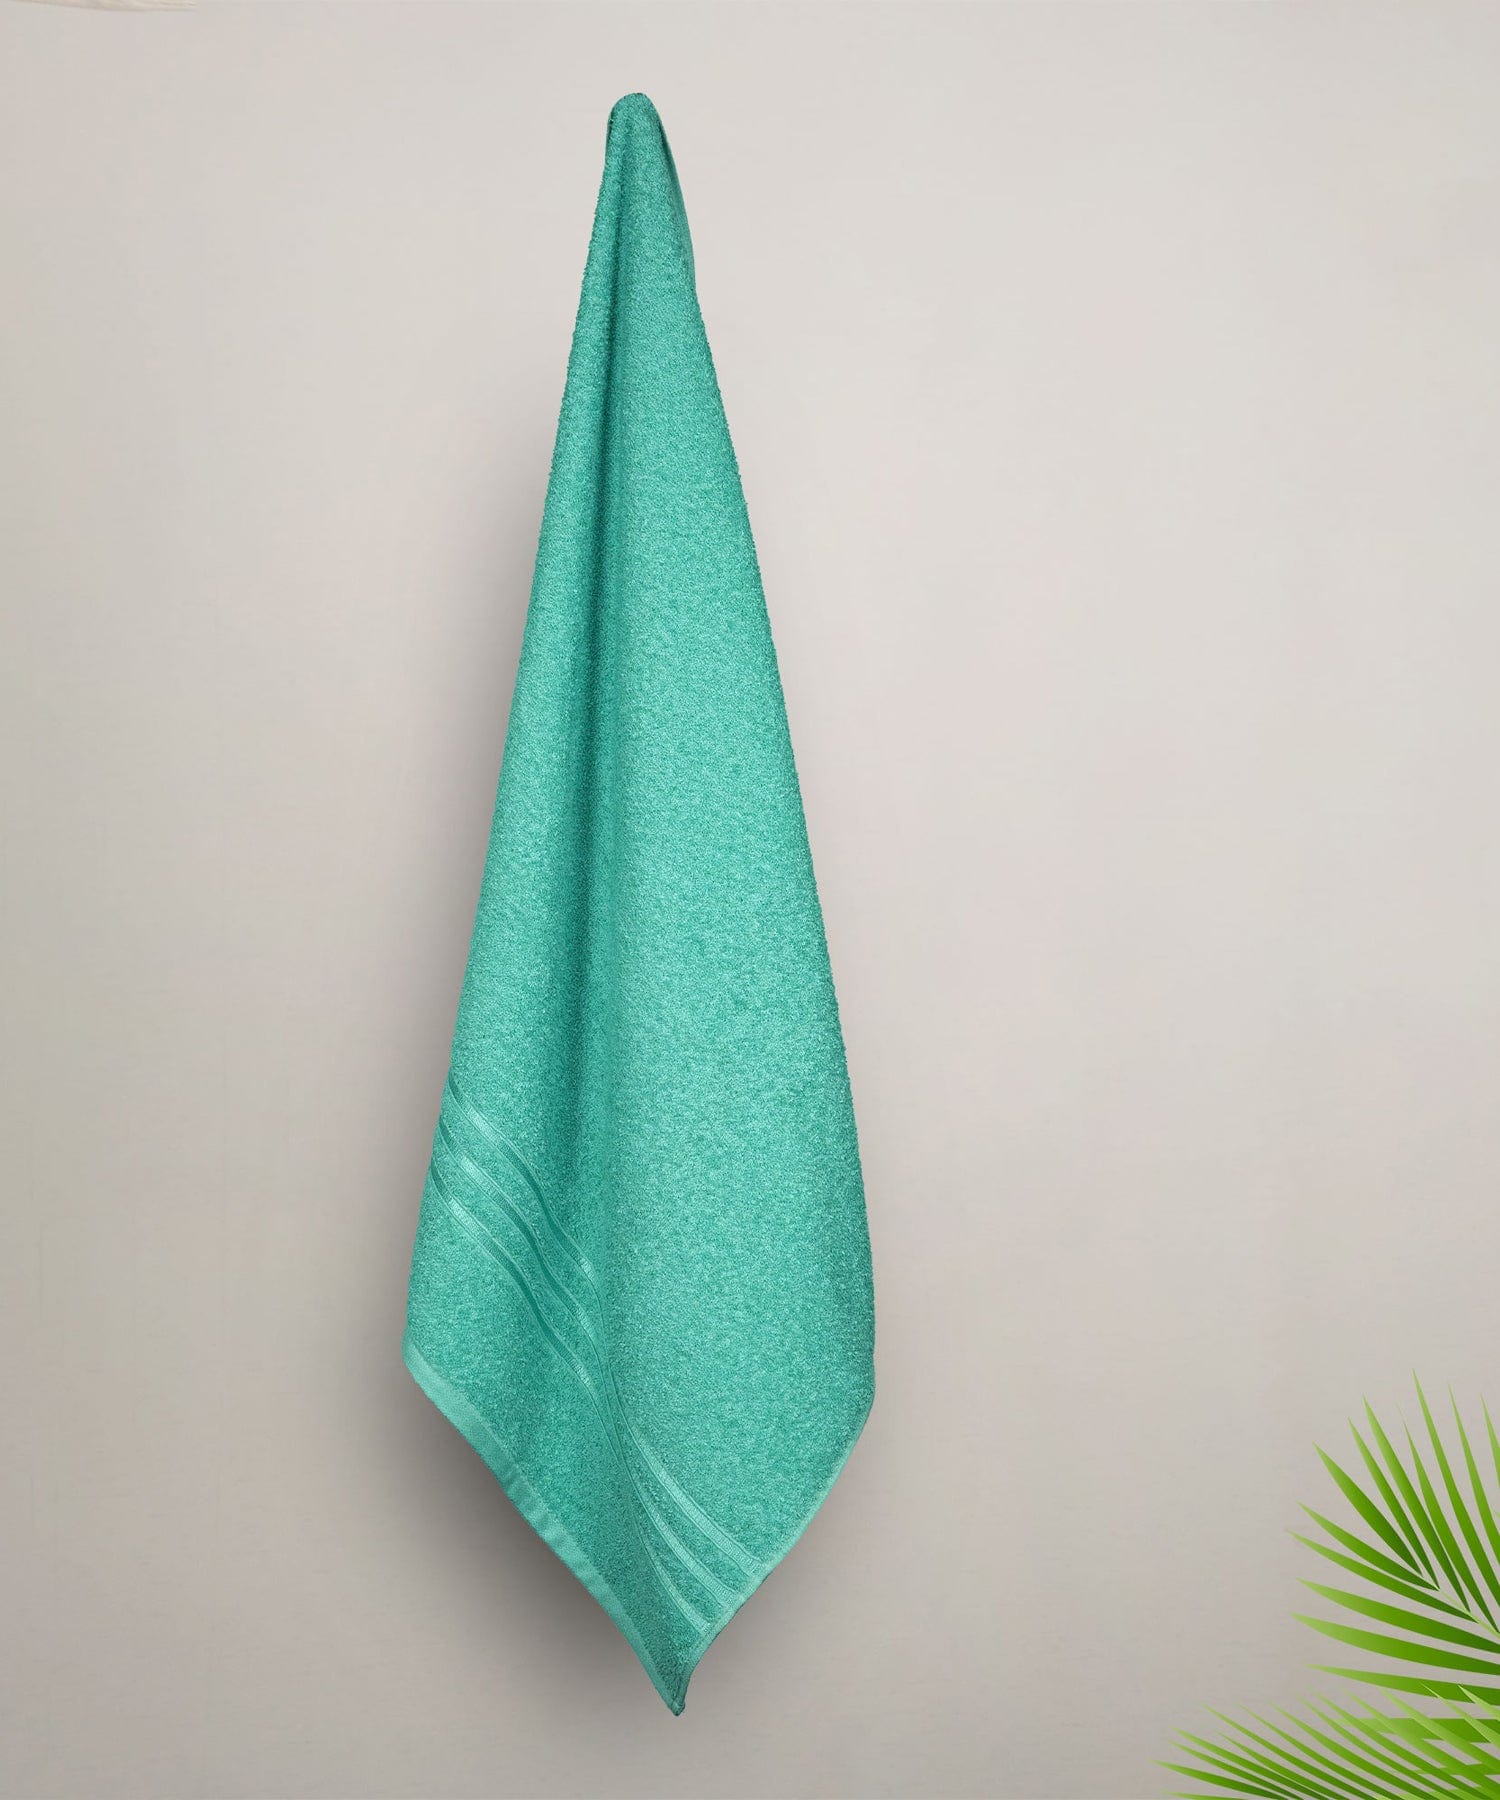 COMFORT LIVING TOWELS,100% Cotton,Quicky Dry,Light Weight, SEA GREEN